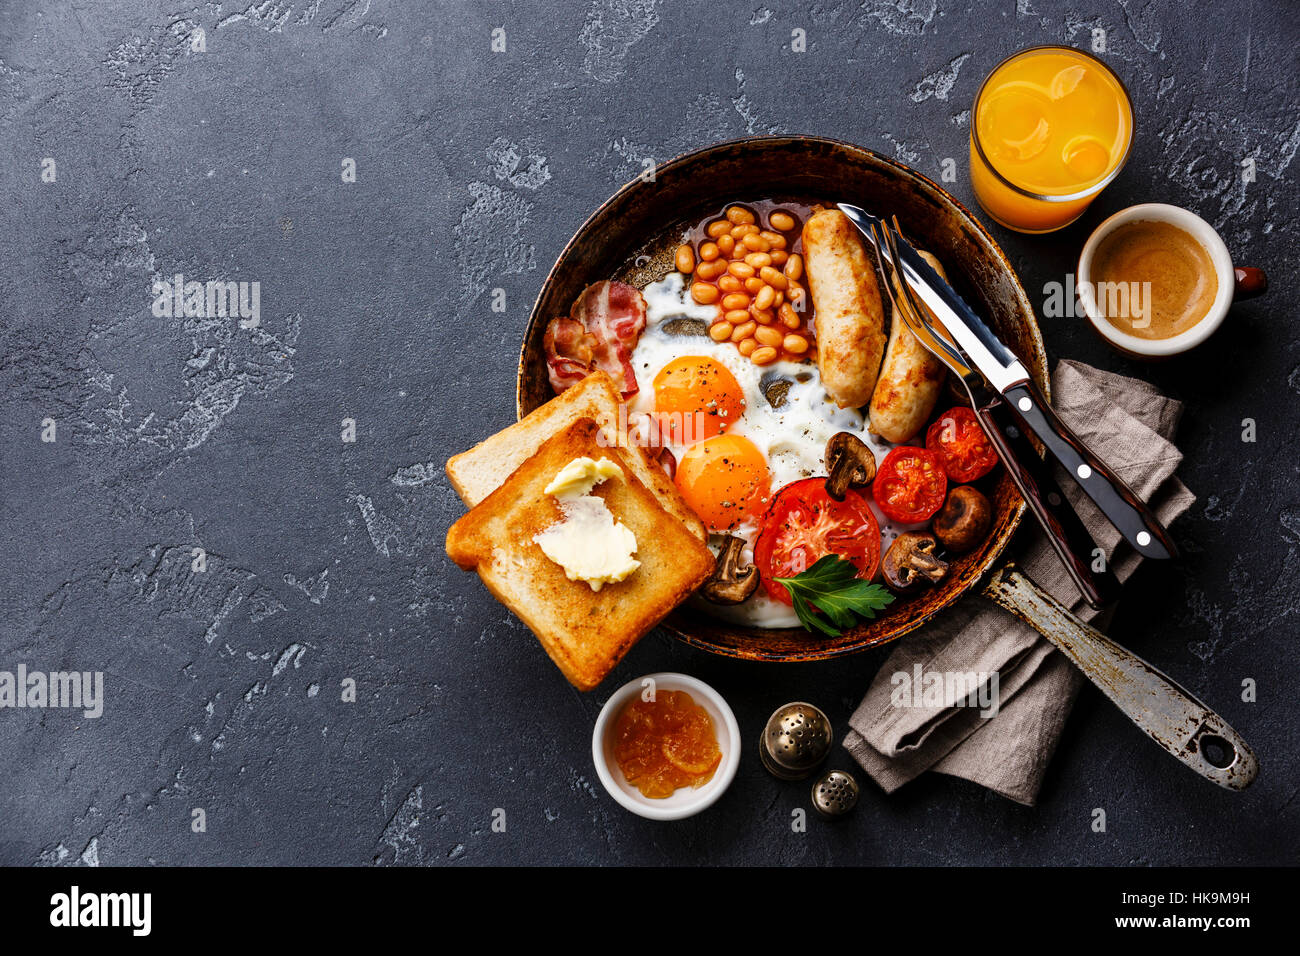 English breakfast in pan with fried eggs, sausages, bacon, beans, toasts and coffee on dark stone background copy space Stock Photo